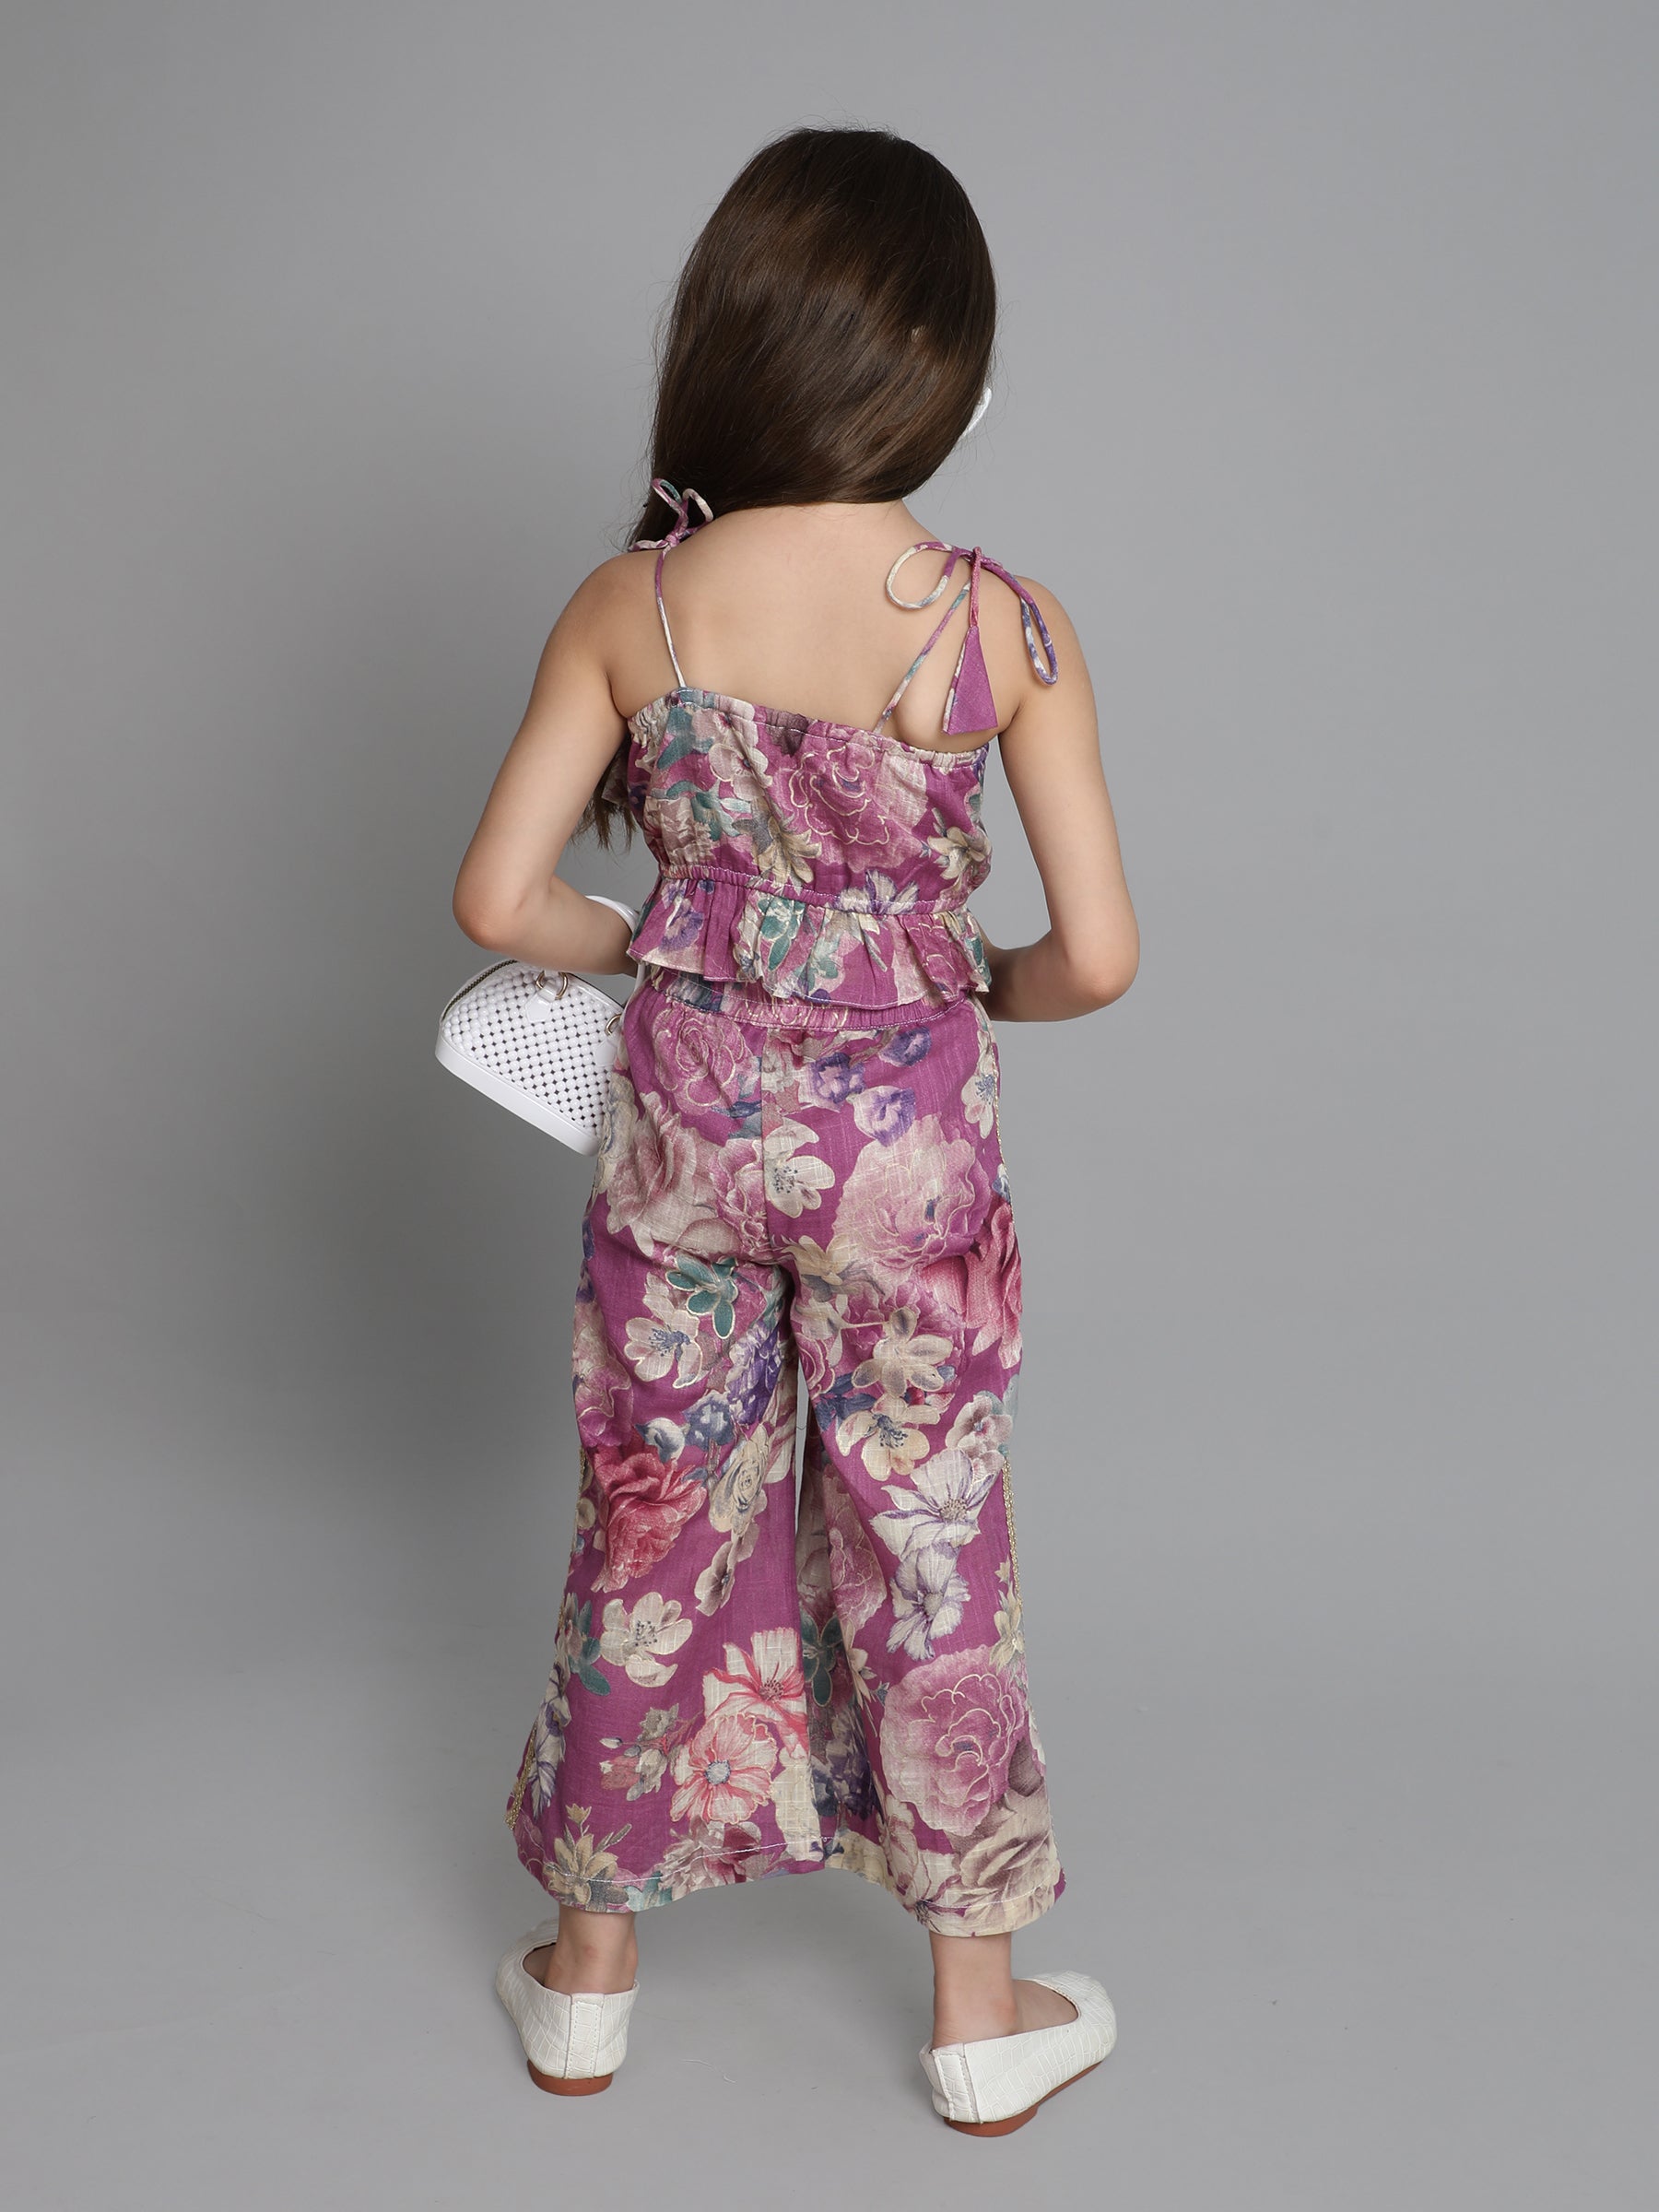 Taffy floral printed shoulder tie up ethnic peplum crop top with matching lace detail palazo pant set-Purple/Multi